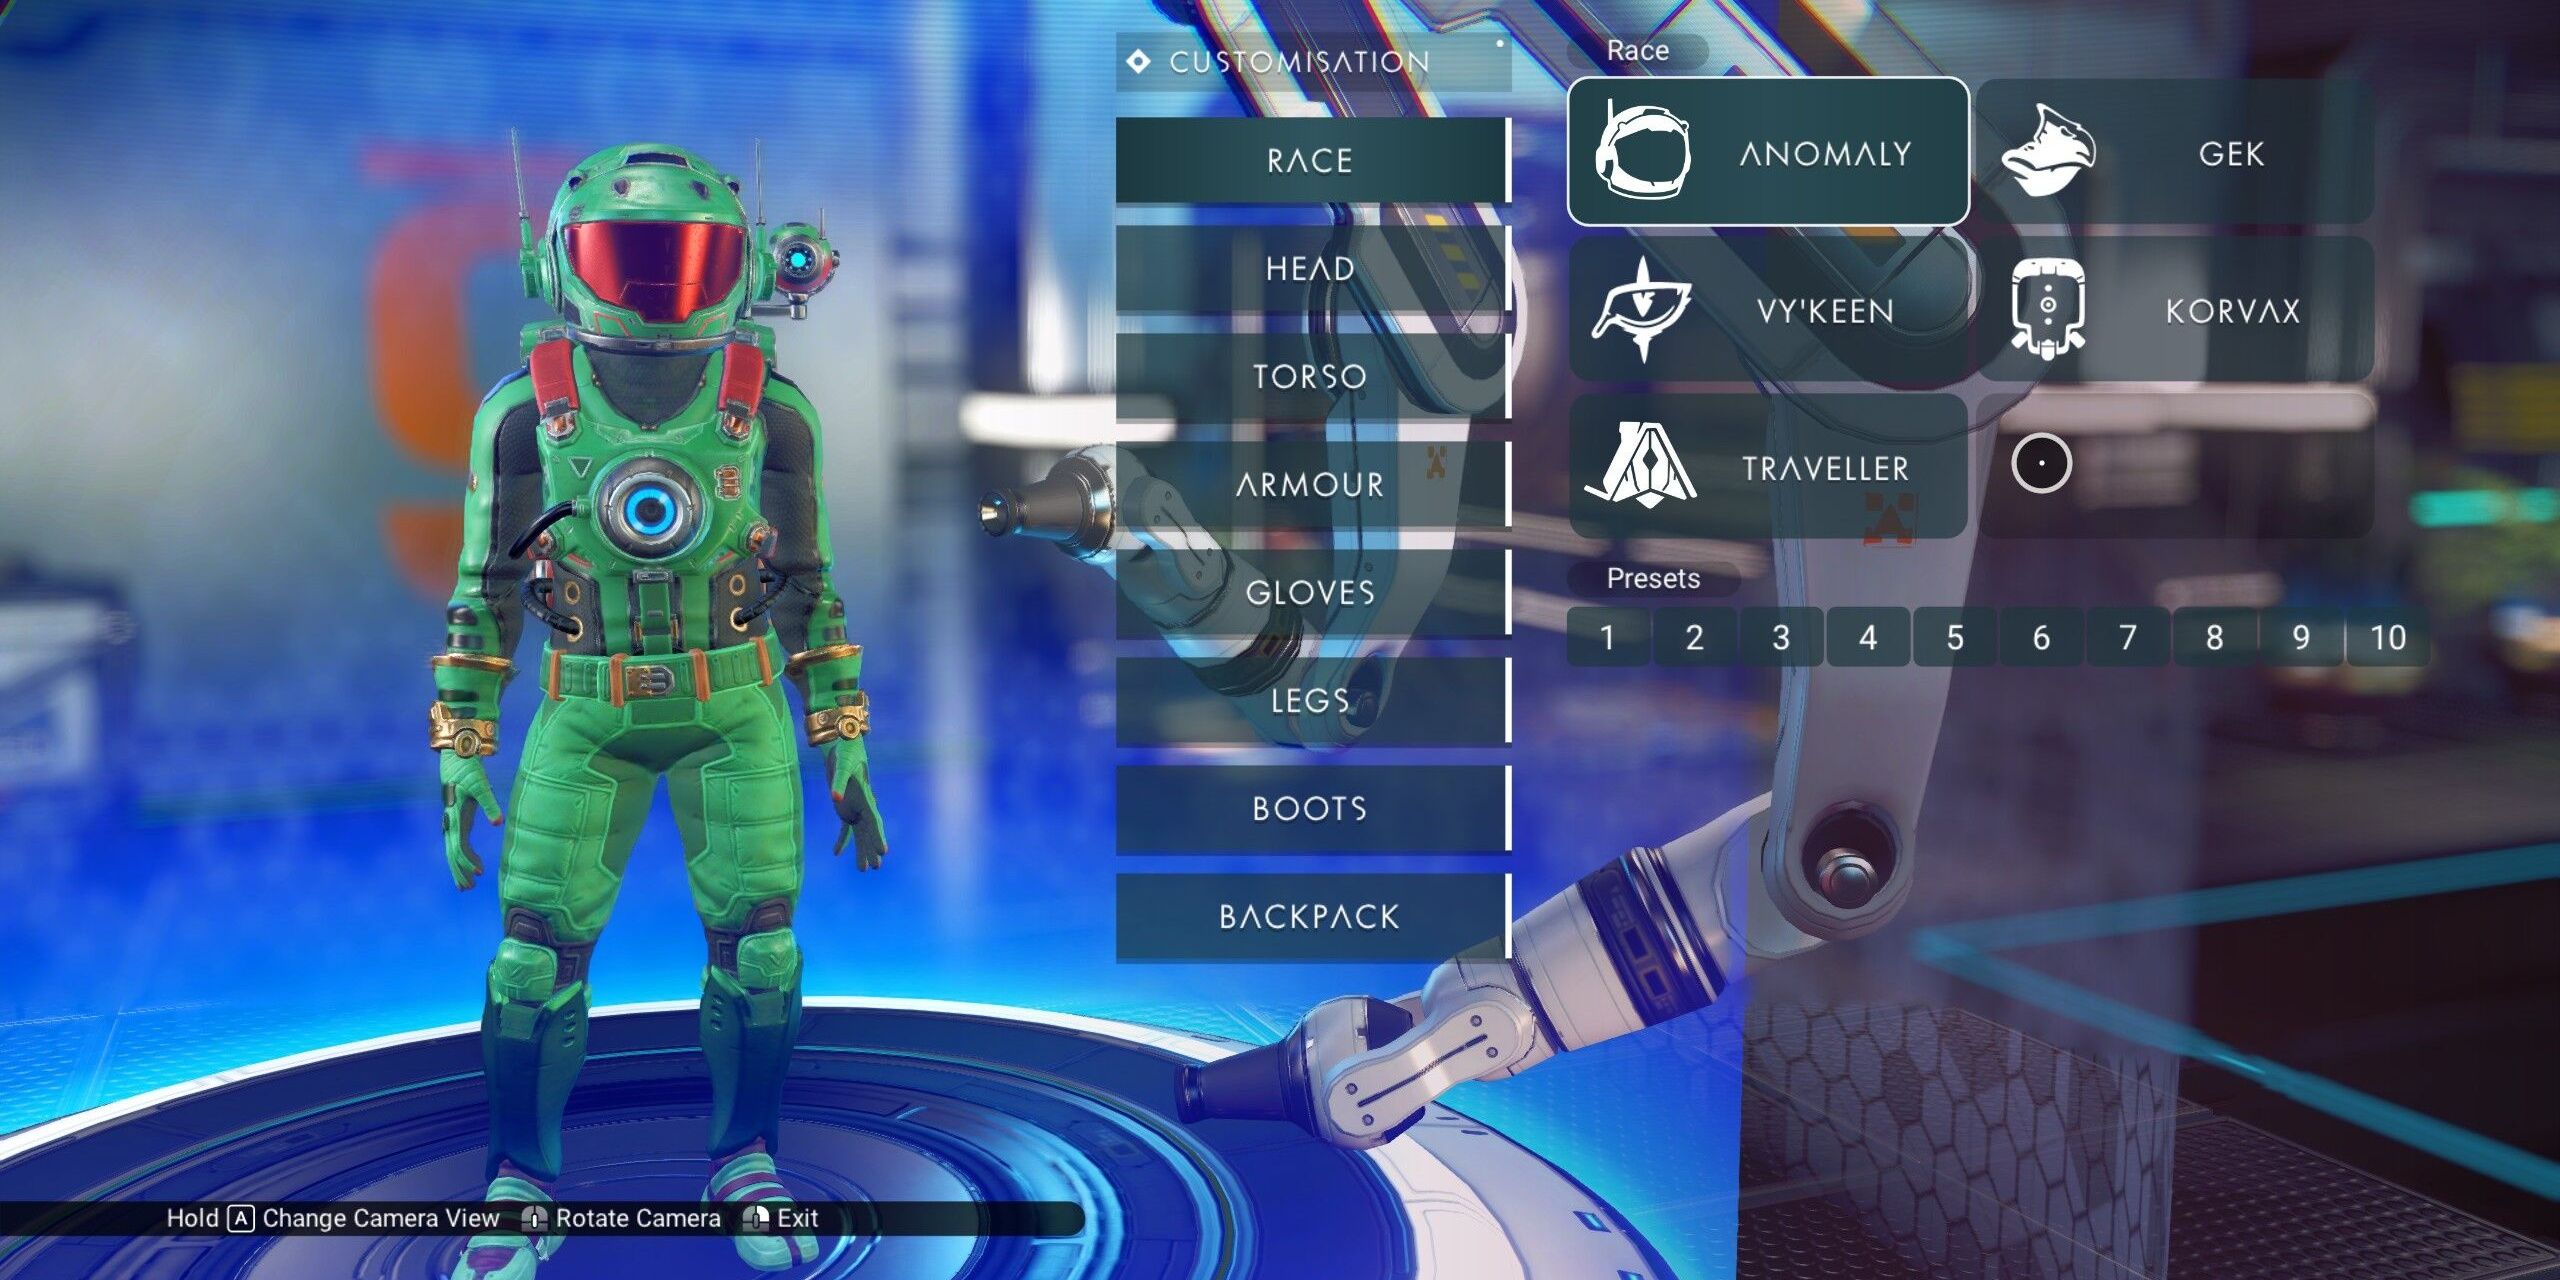 An anomaly player character on the No Man's Sky character creation screen